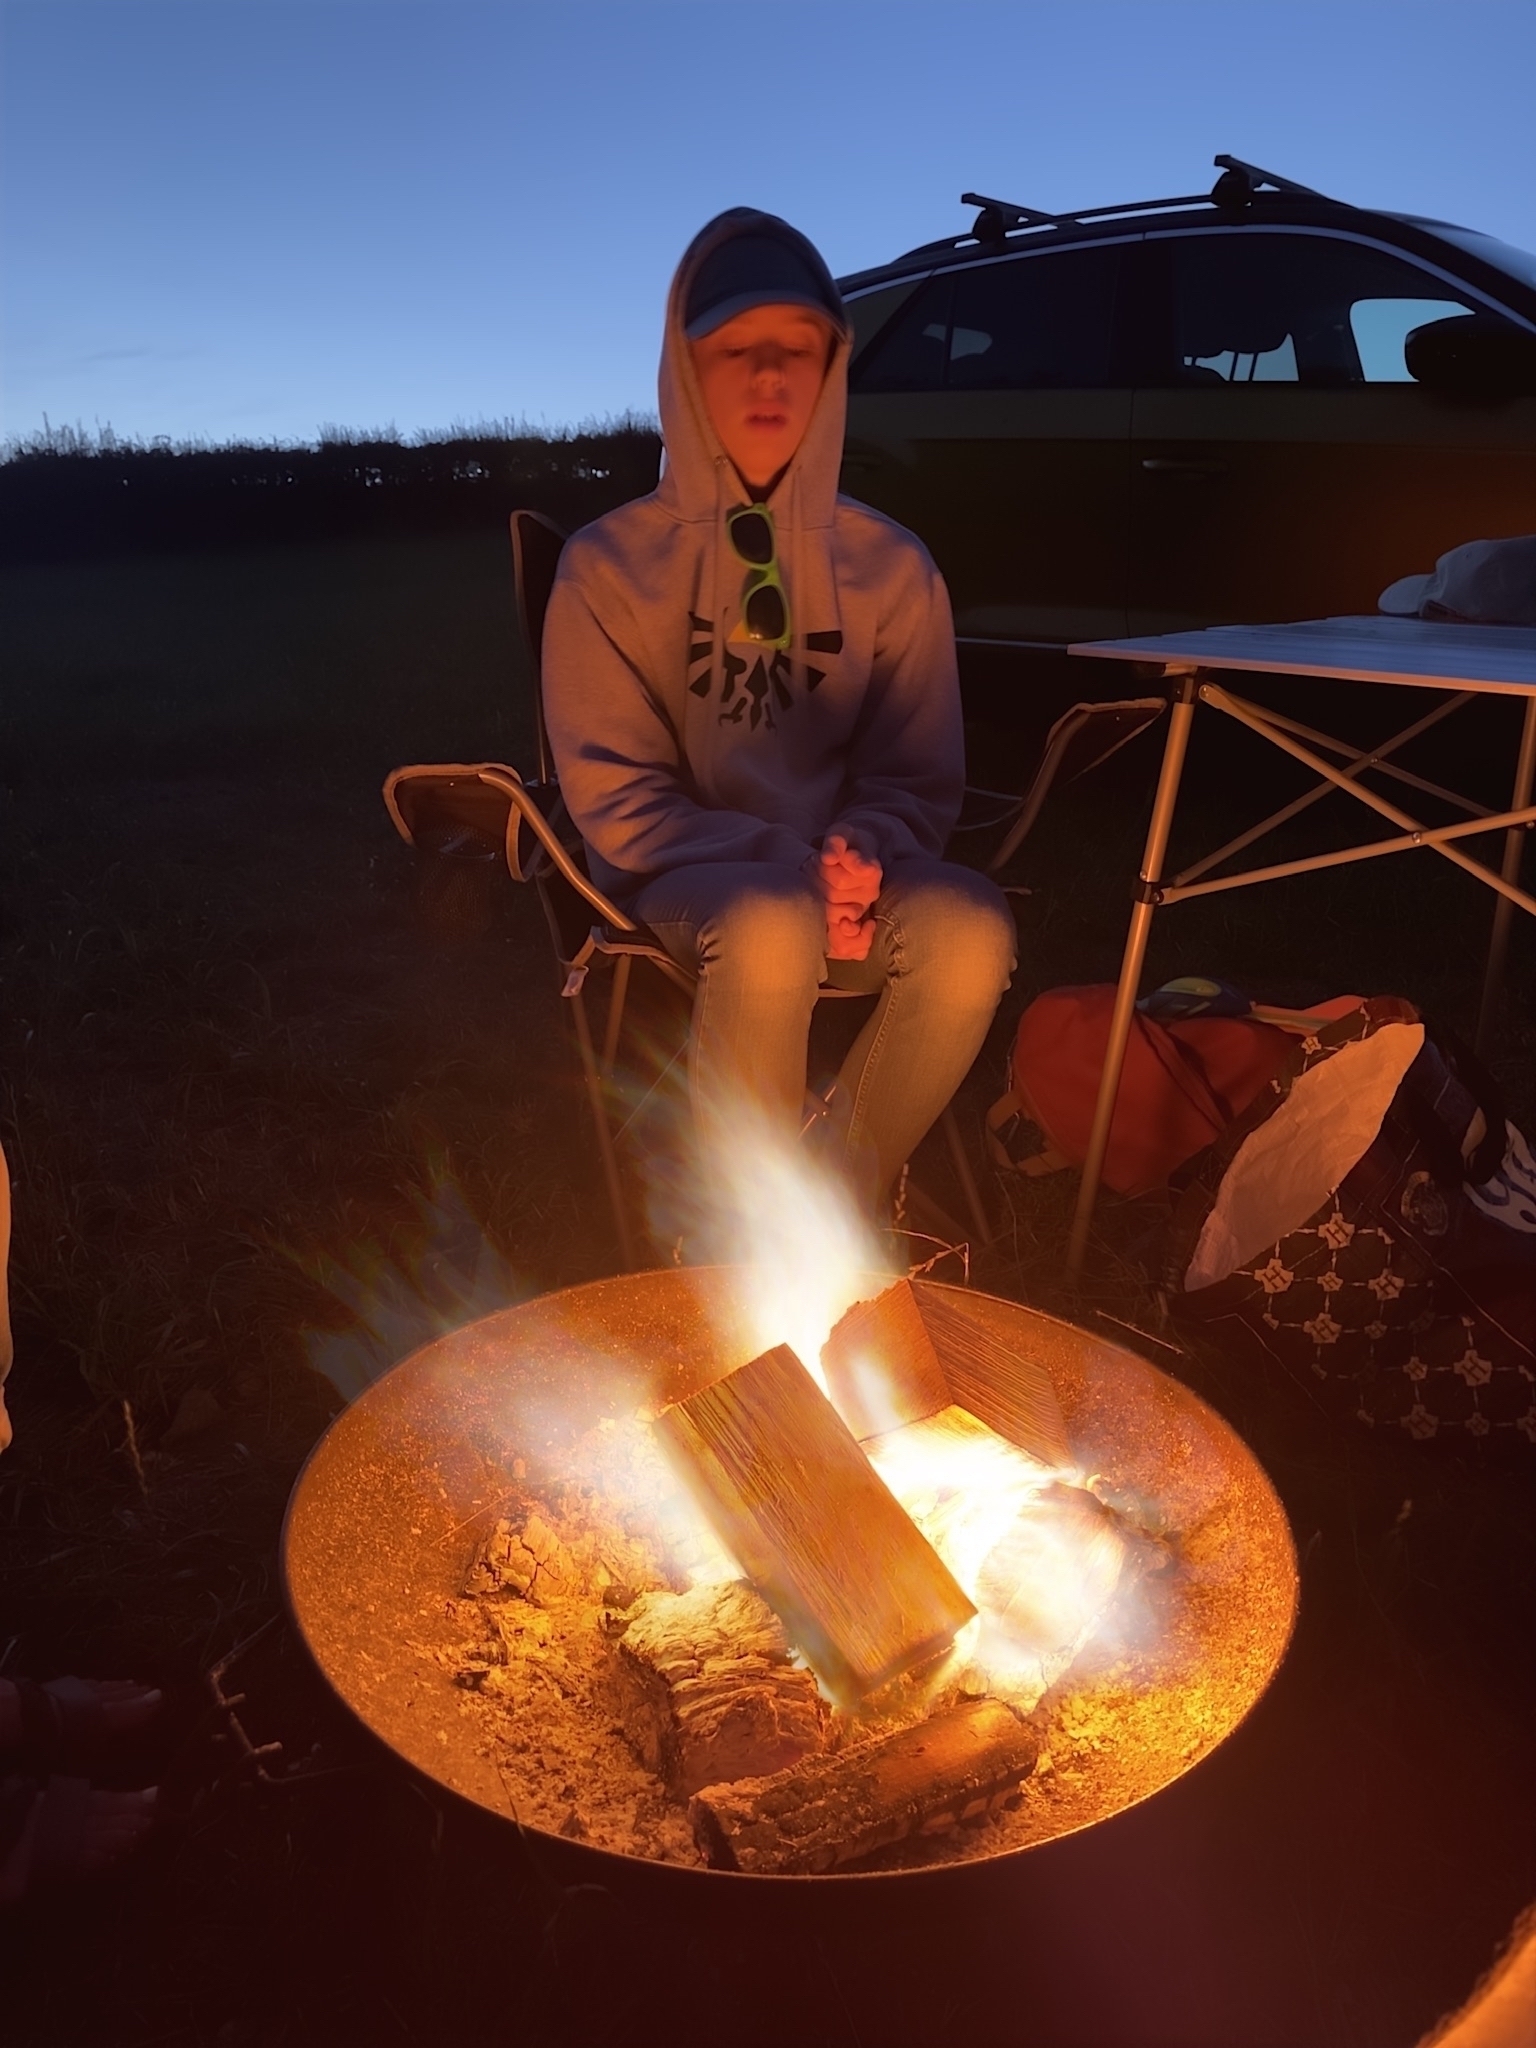 A long exposure of a campfire. My son in a hoodie is in the background as the light of the fire highlights his face